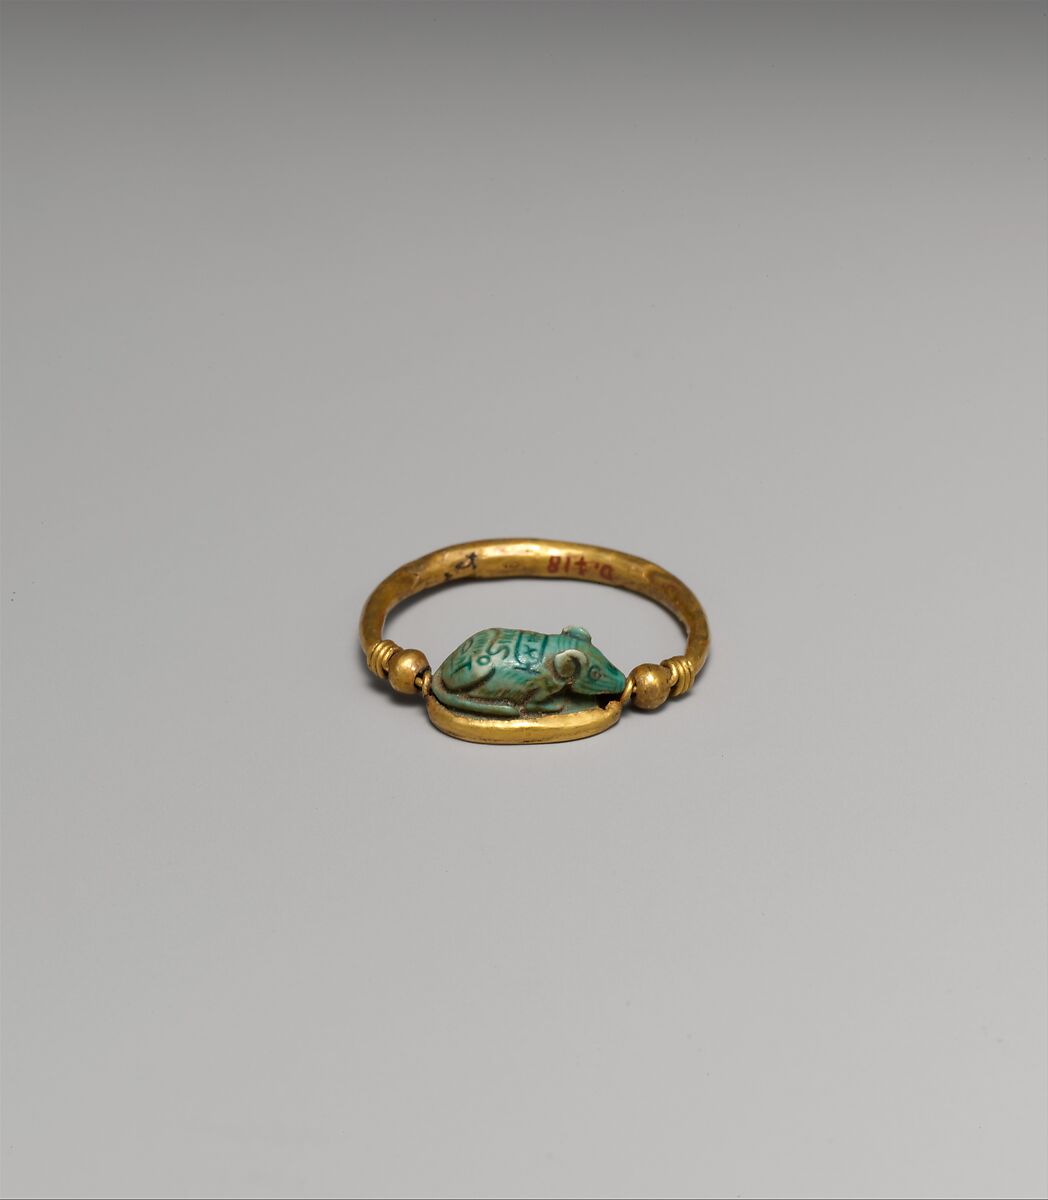 Ring set with a mouse design amulet, Gold, glazed steatite 